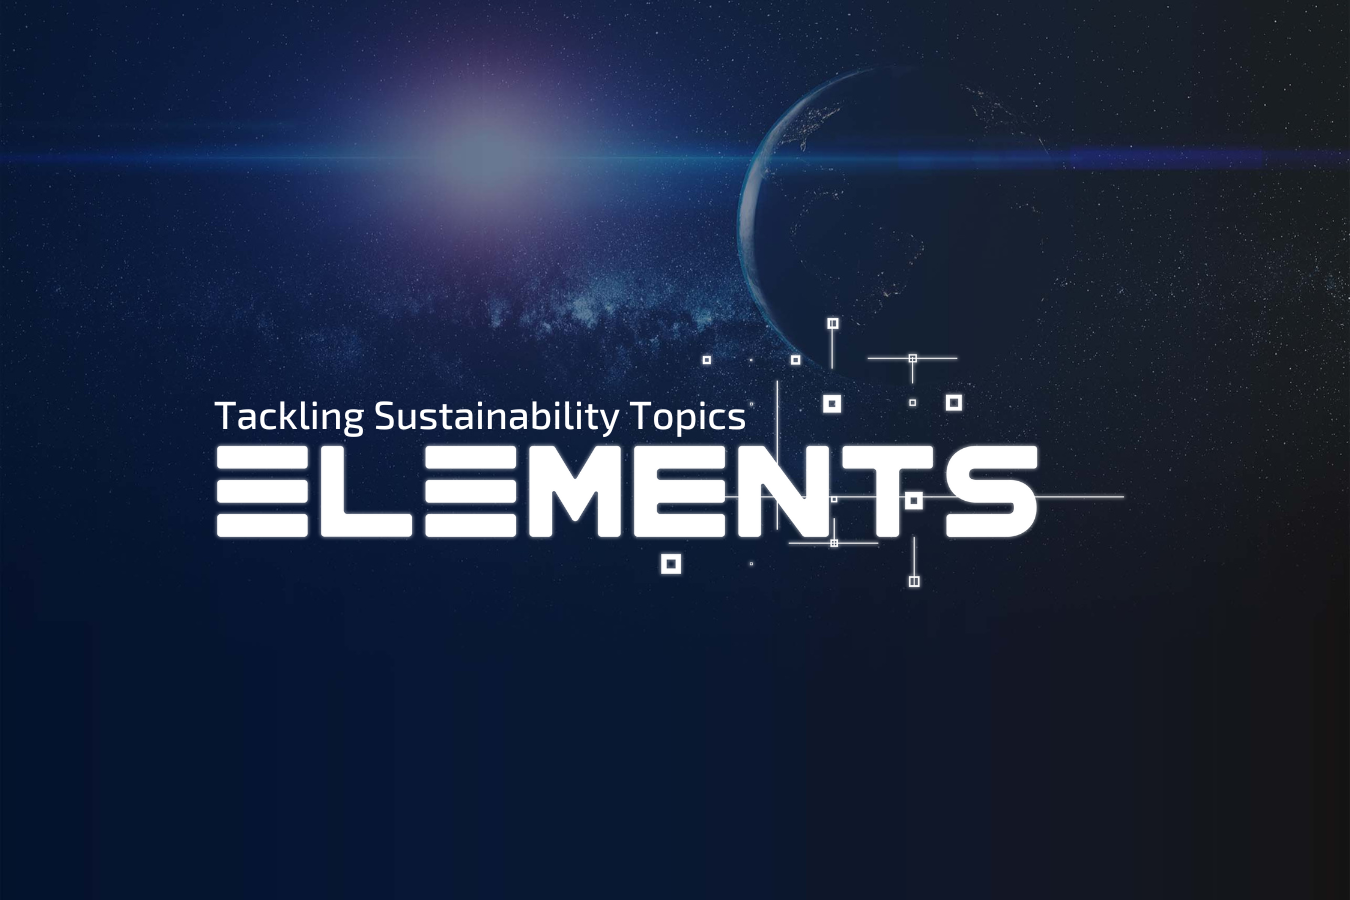 Edge Factor Launches new series, Elements, that tackles sustainability topics